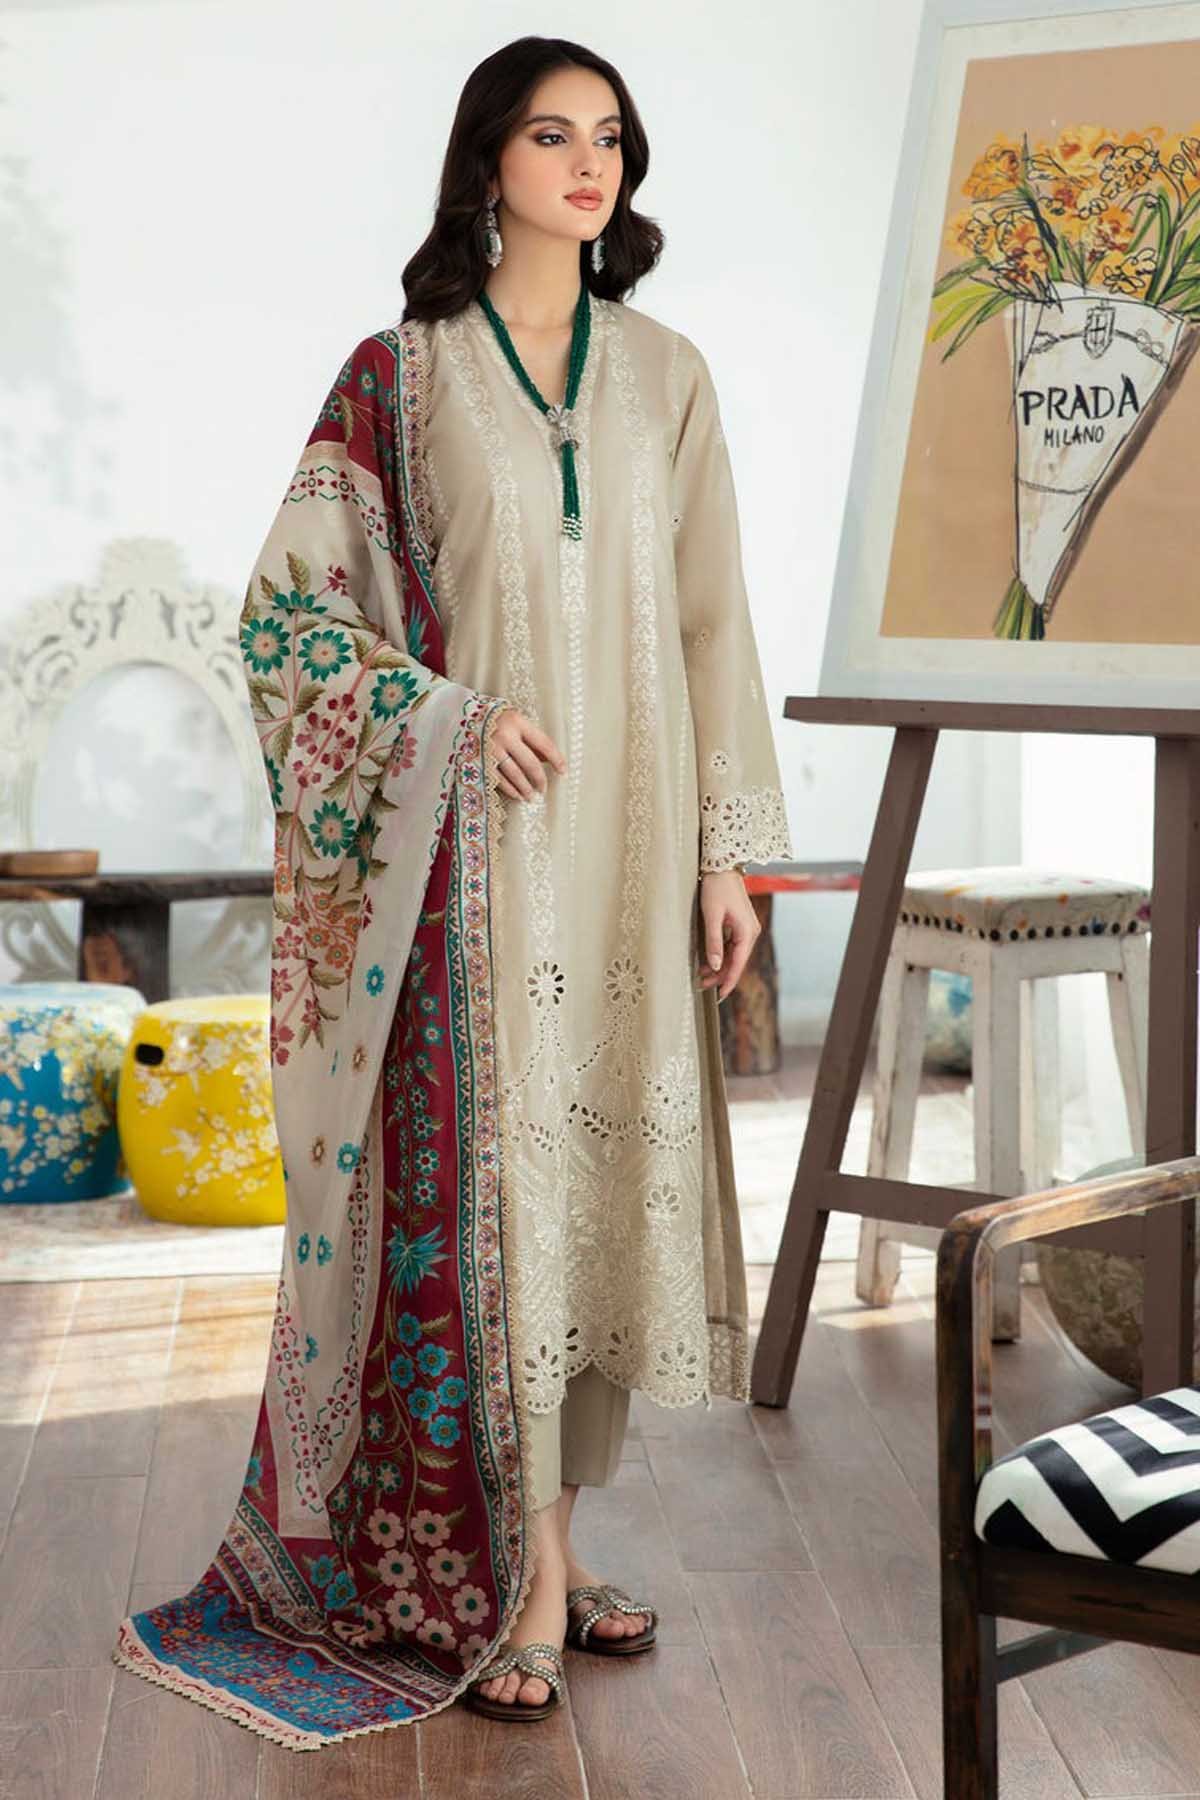 laam women new dress design empires collection luxury lawn summer suit pakistan clothing fashion